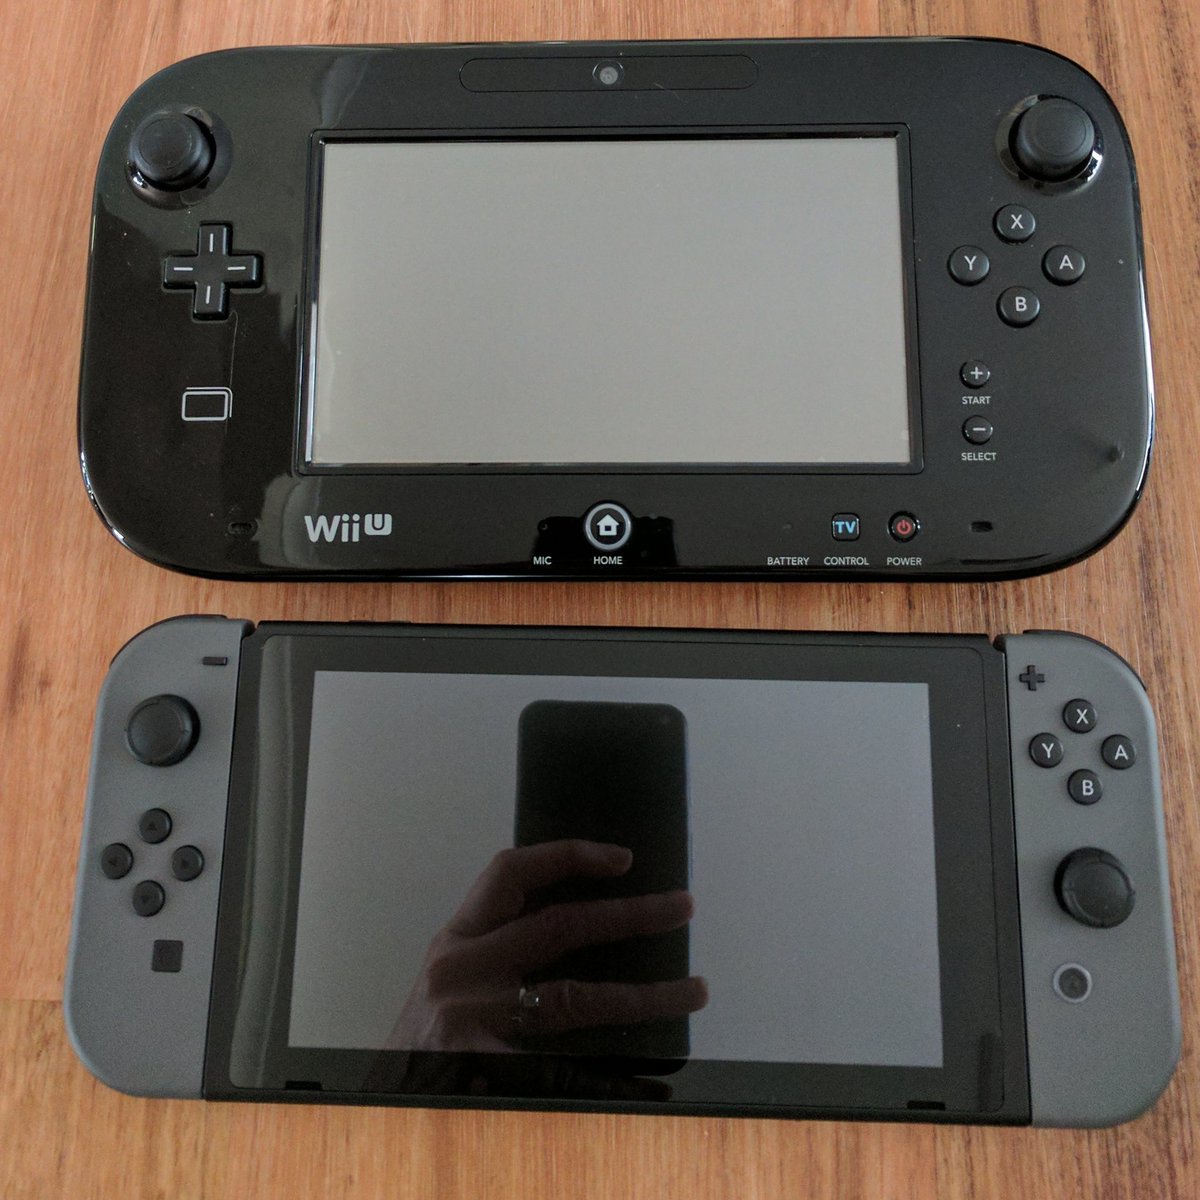 Zelda Universe Size Comparison Between The Wii U Game Pad And The Nintendo Switch In Handheld Mode Nintendoswitch Nintendo Wiiu T Co Aocgizhpin